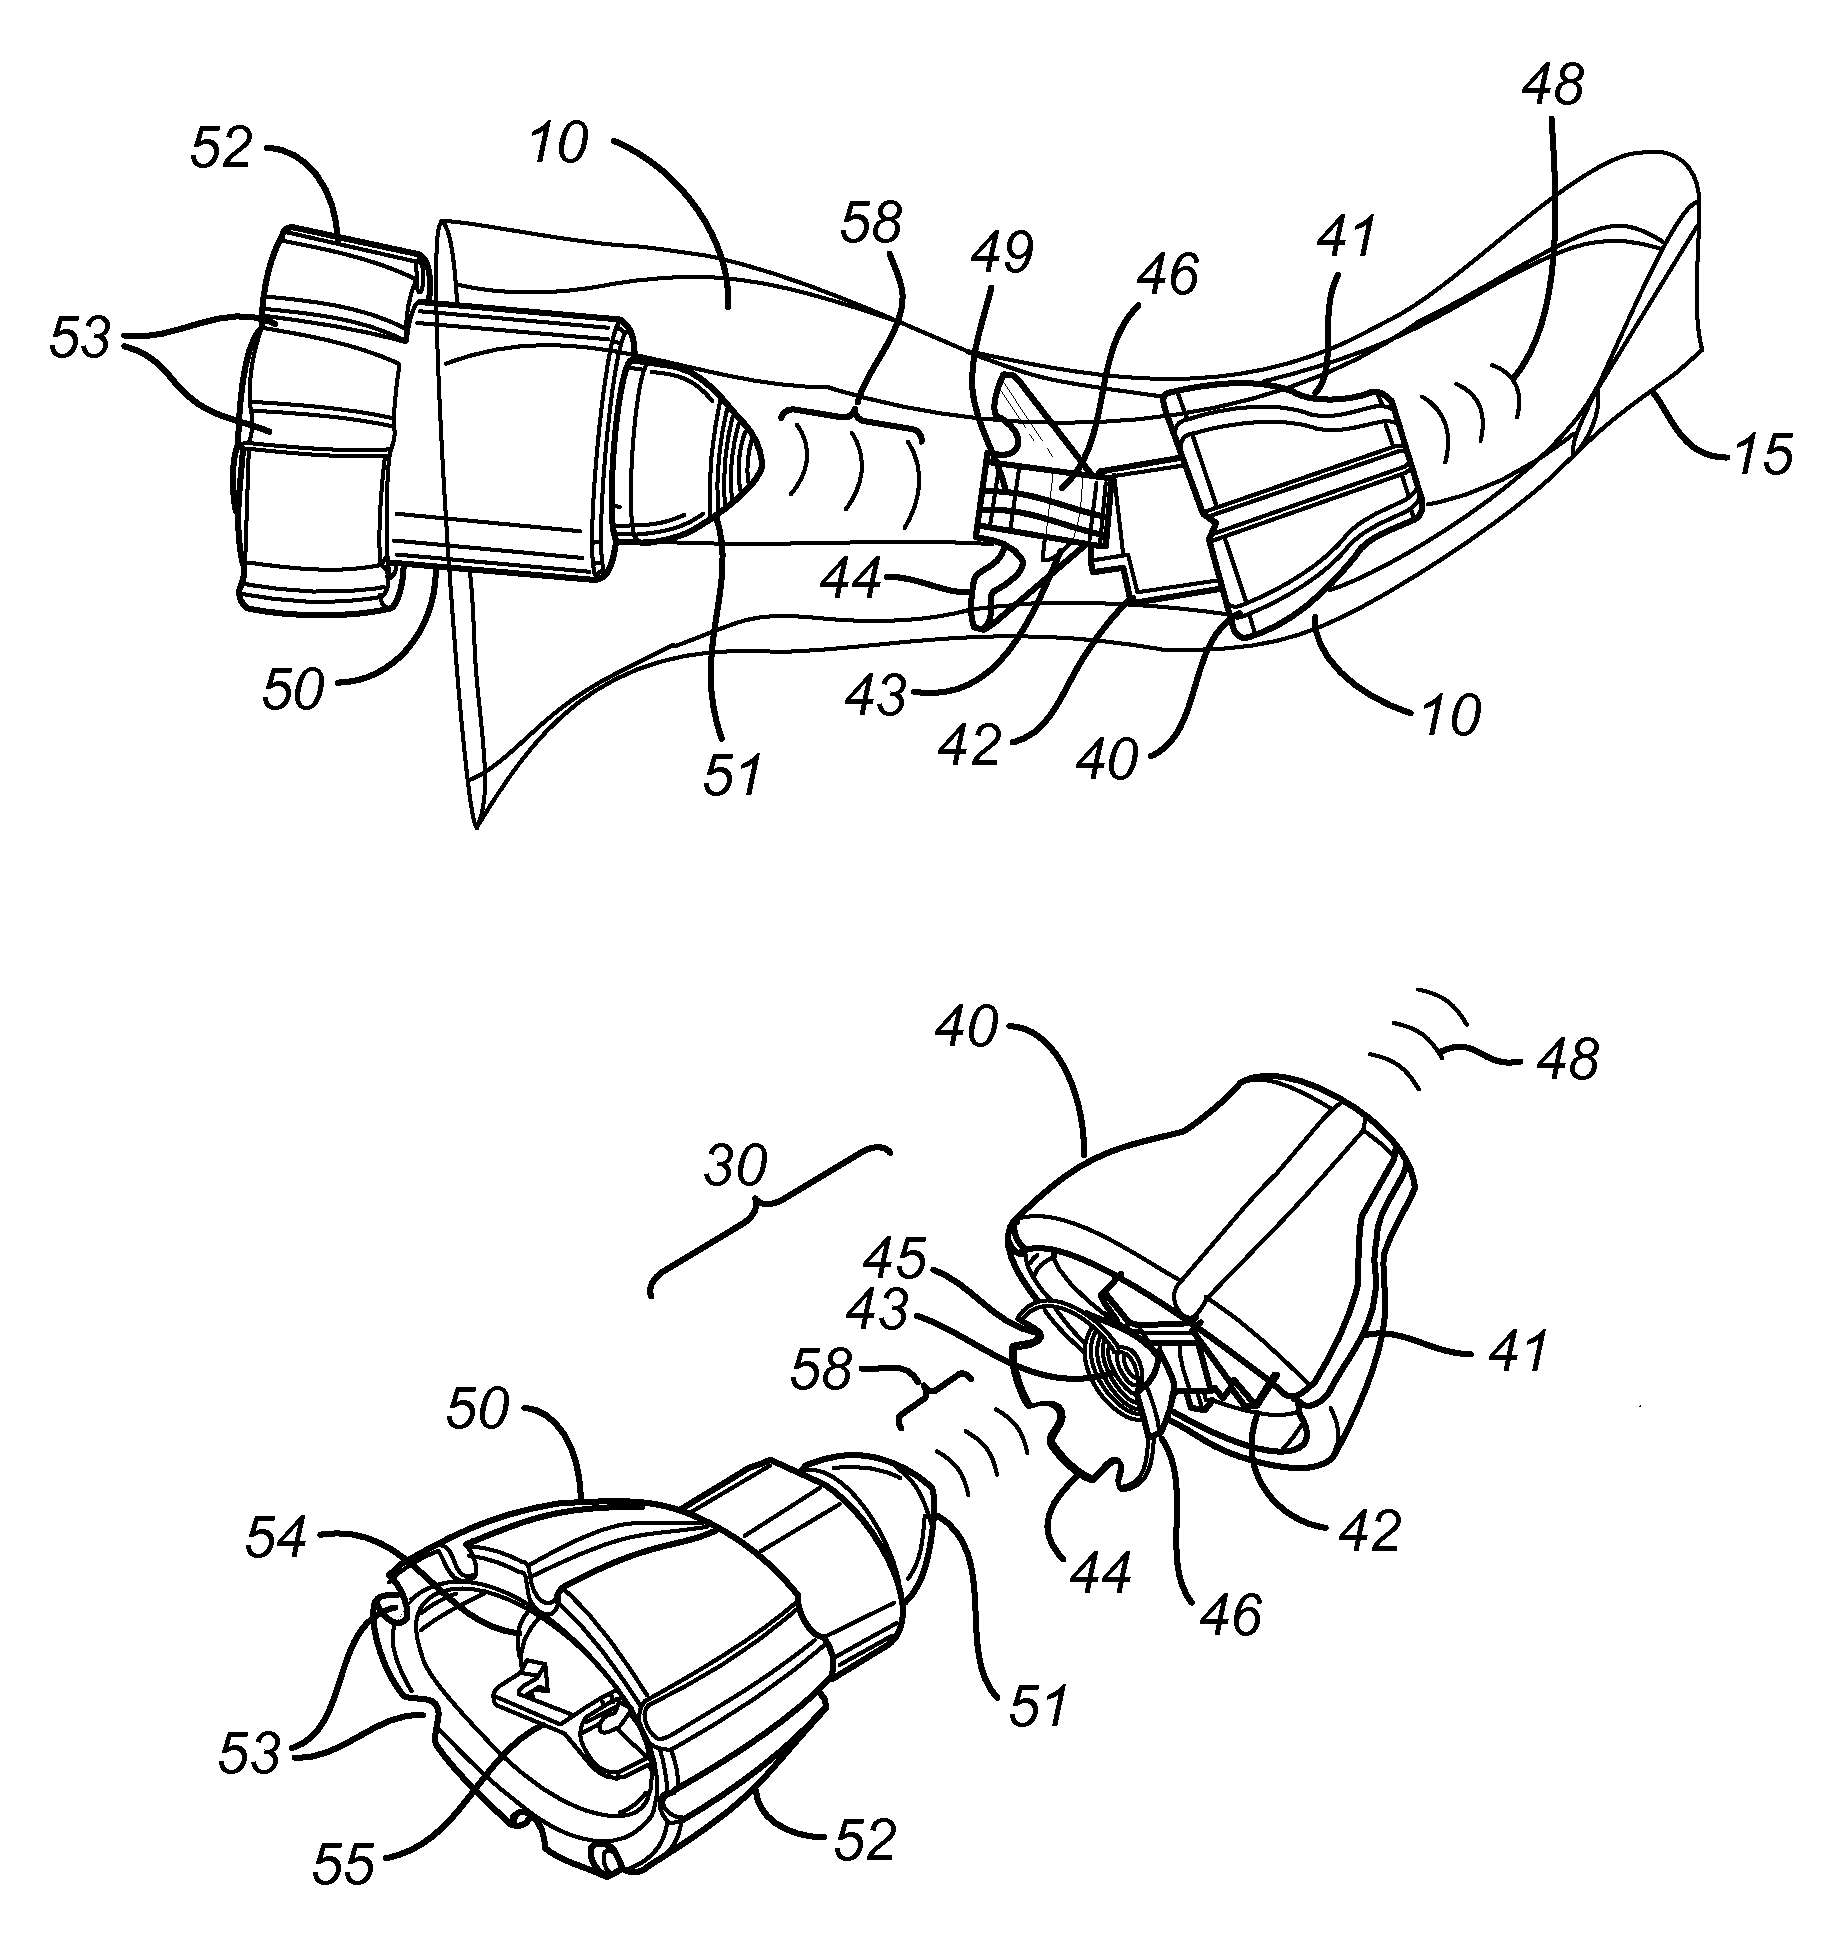 Hearing device with semipermanent canal receiver module